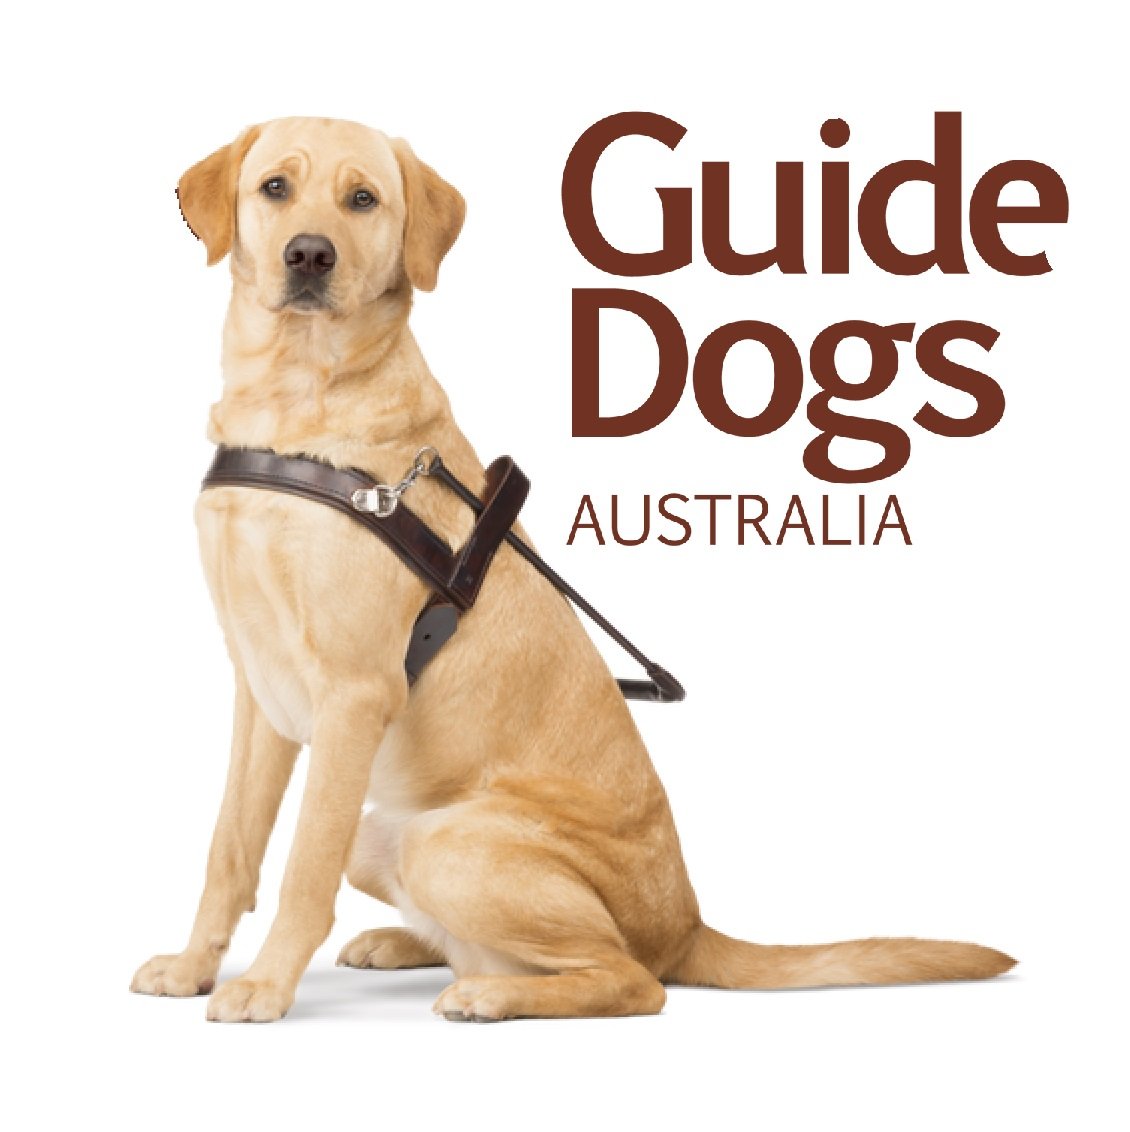 $50 Give to Guide Dogs Victoria (6700 Loyalty Points)